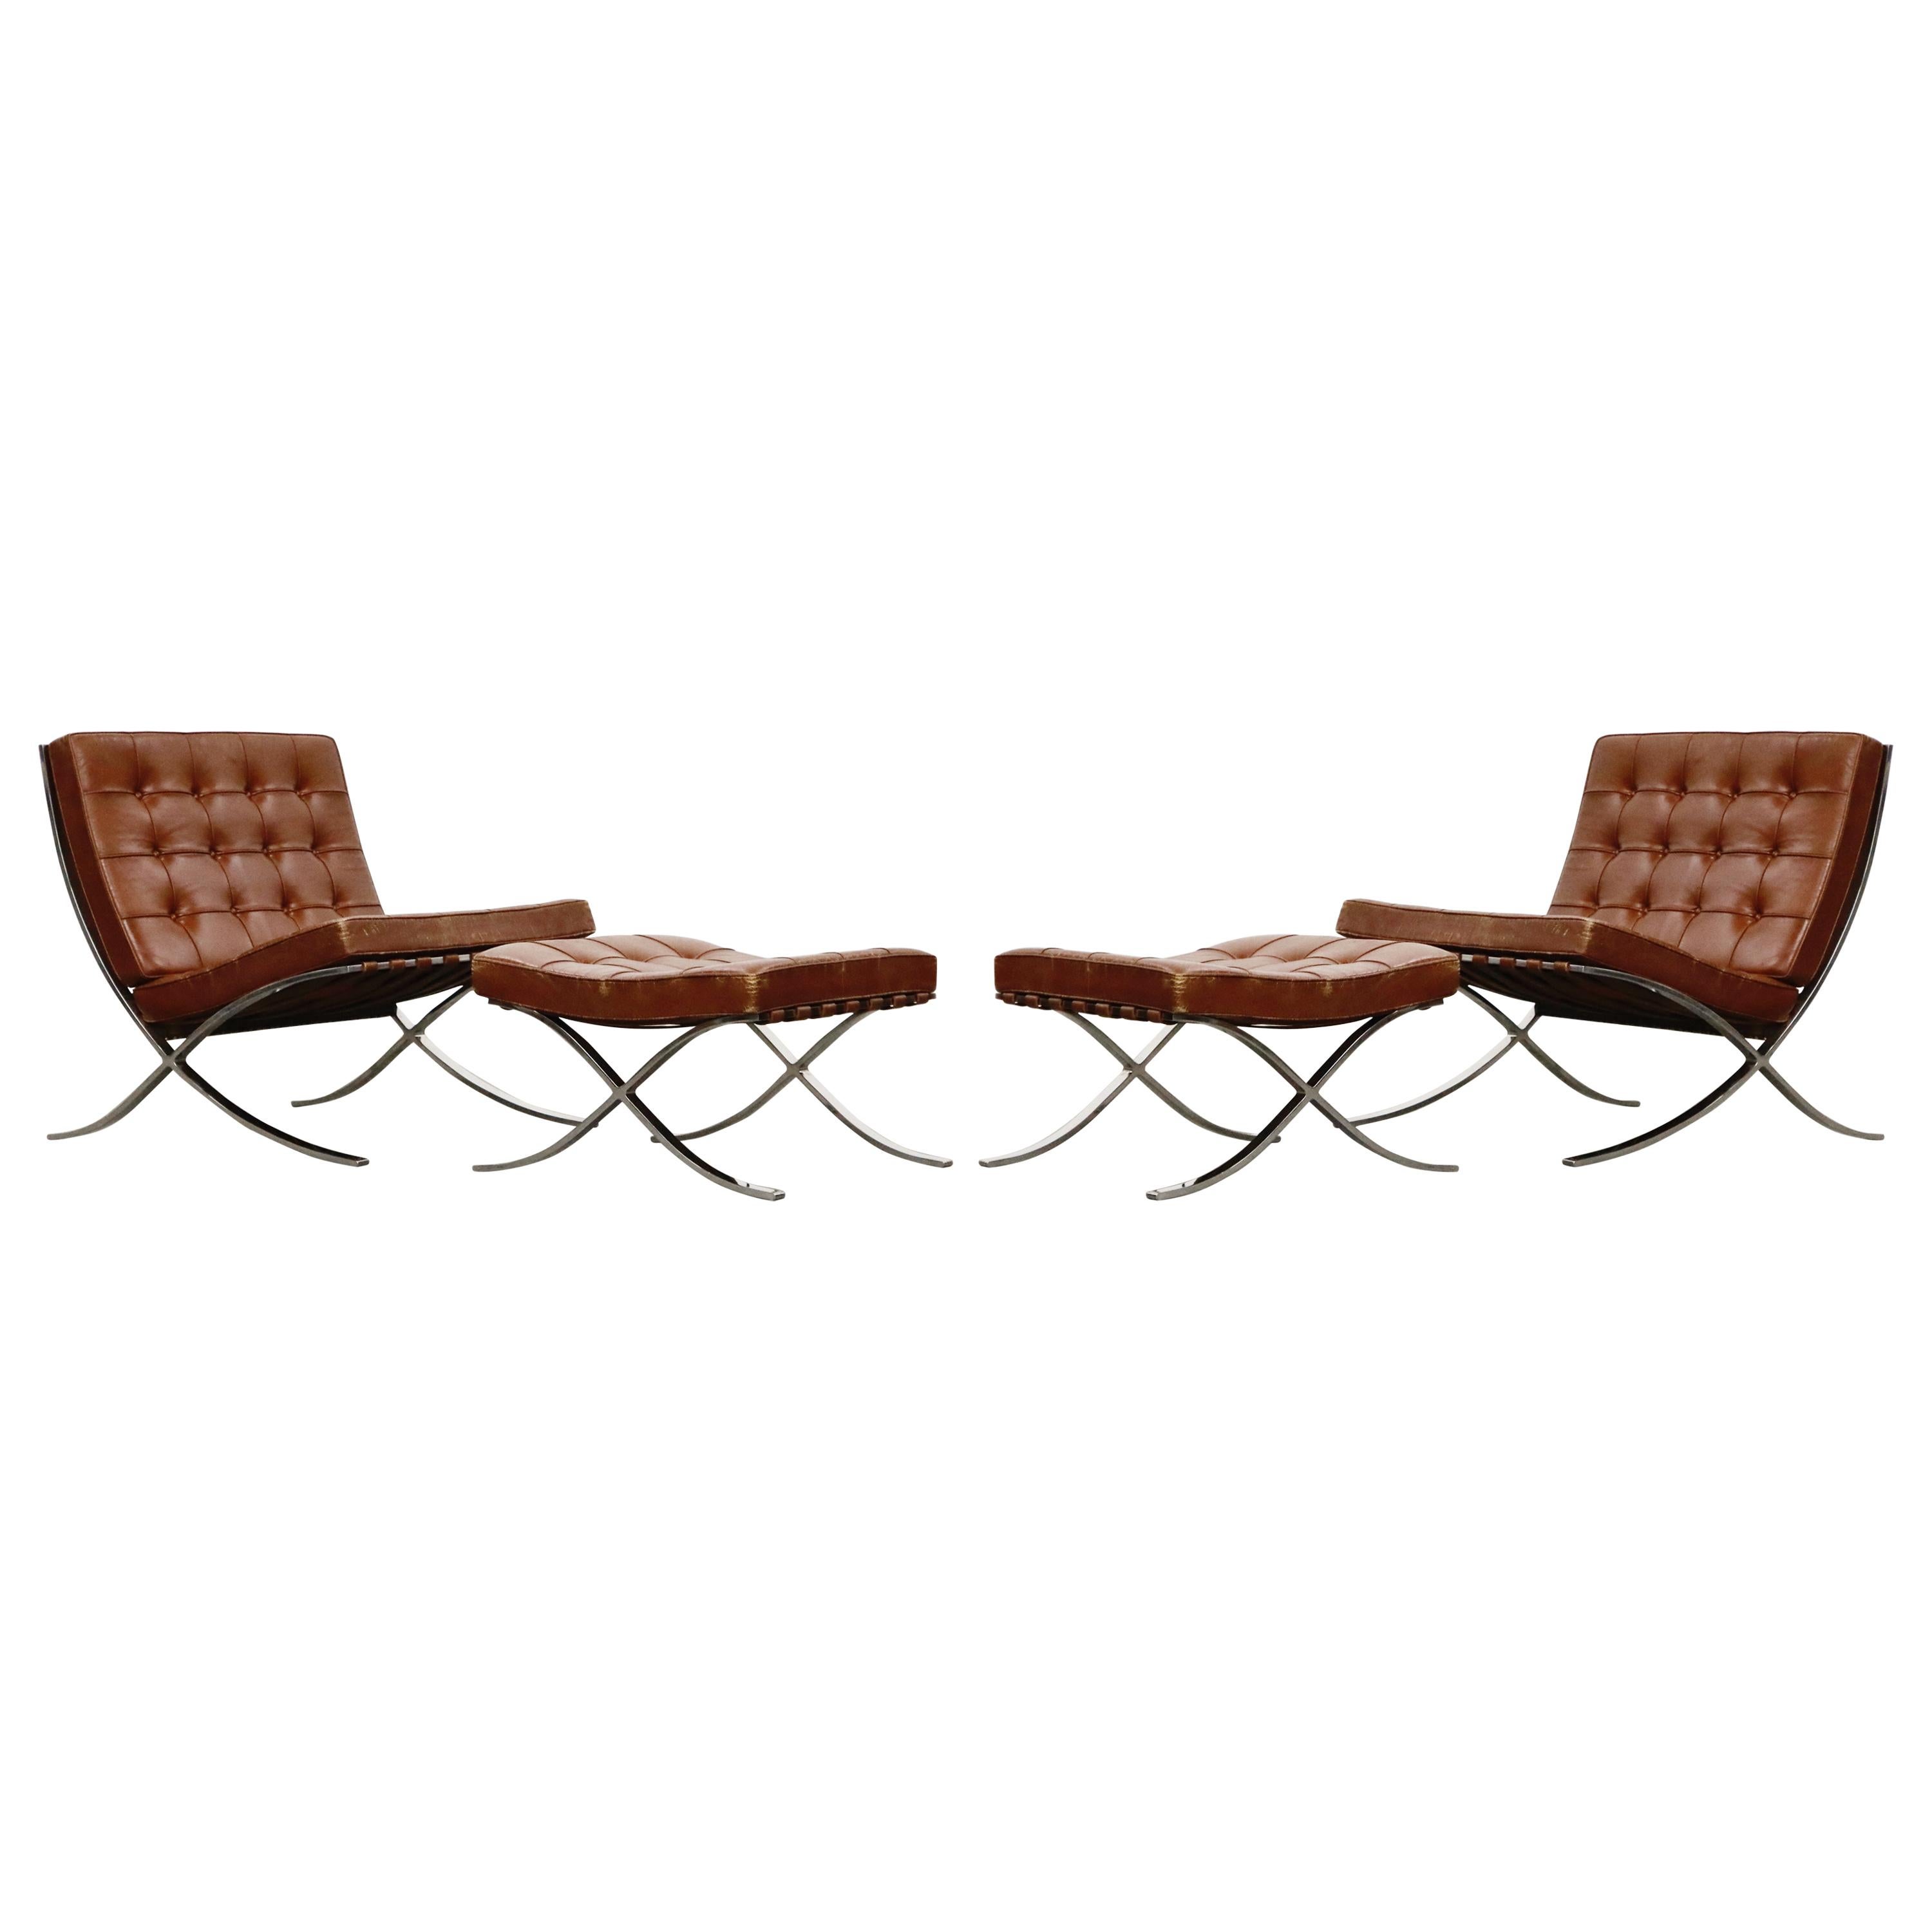 Set of Knoll Associates Barcelona Chairs and Ottomans by Mies van der Rohe, 1961